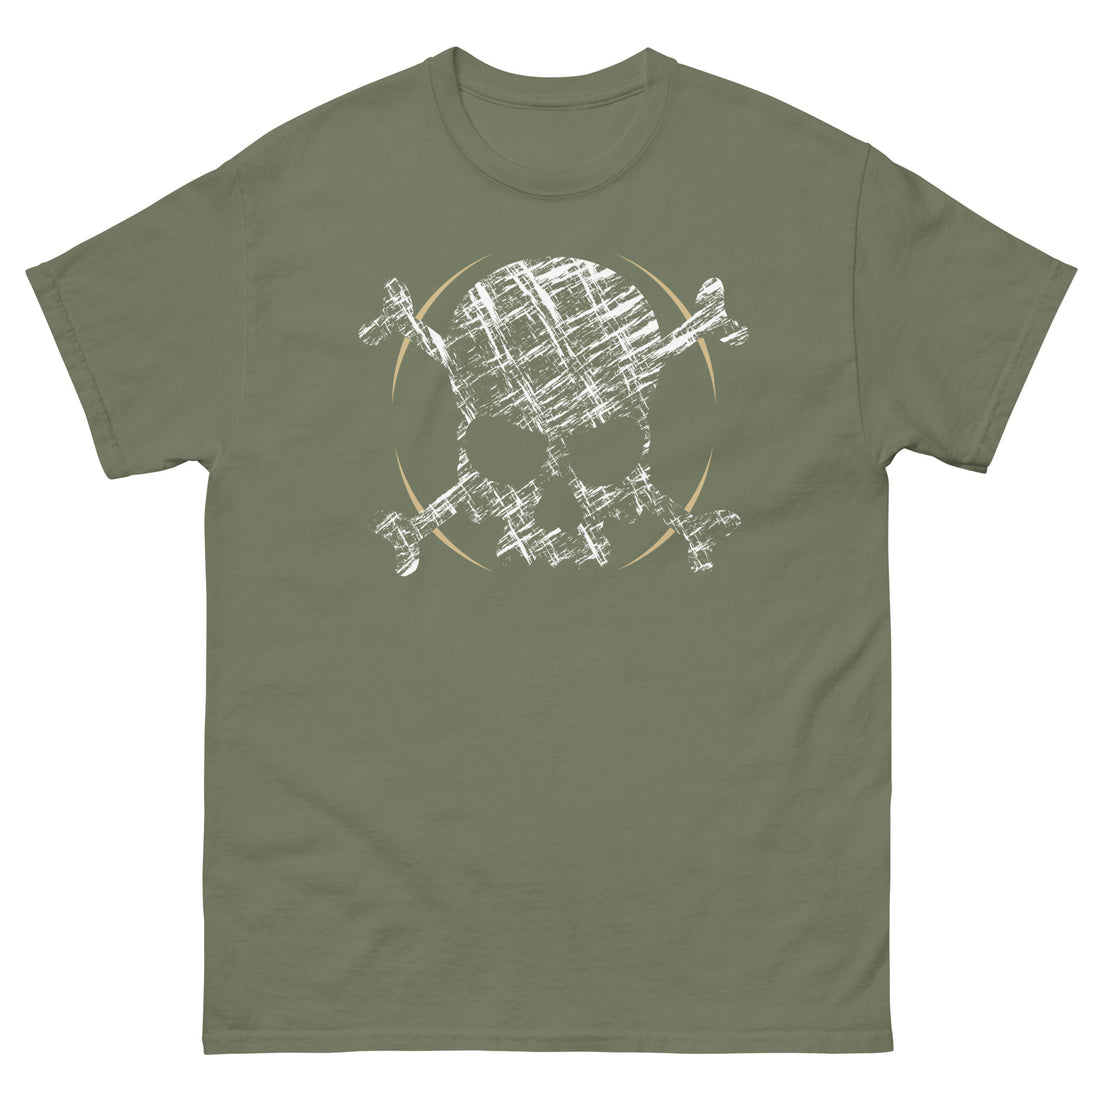 A military green t-shirt adorned with a roughly cross-hatched skull and crossbones in white.  Solid gold arcs give the image the impression of movement towards the end of the crossbones.